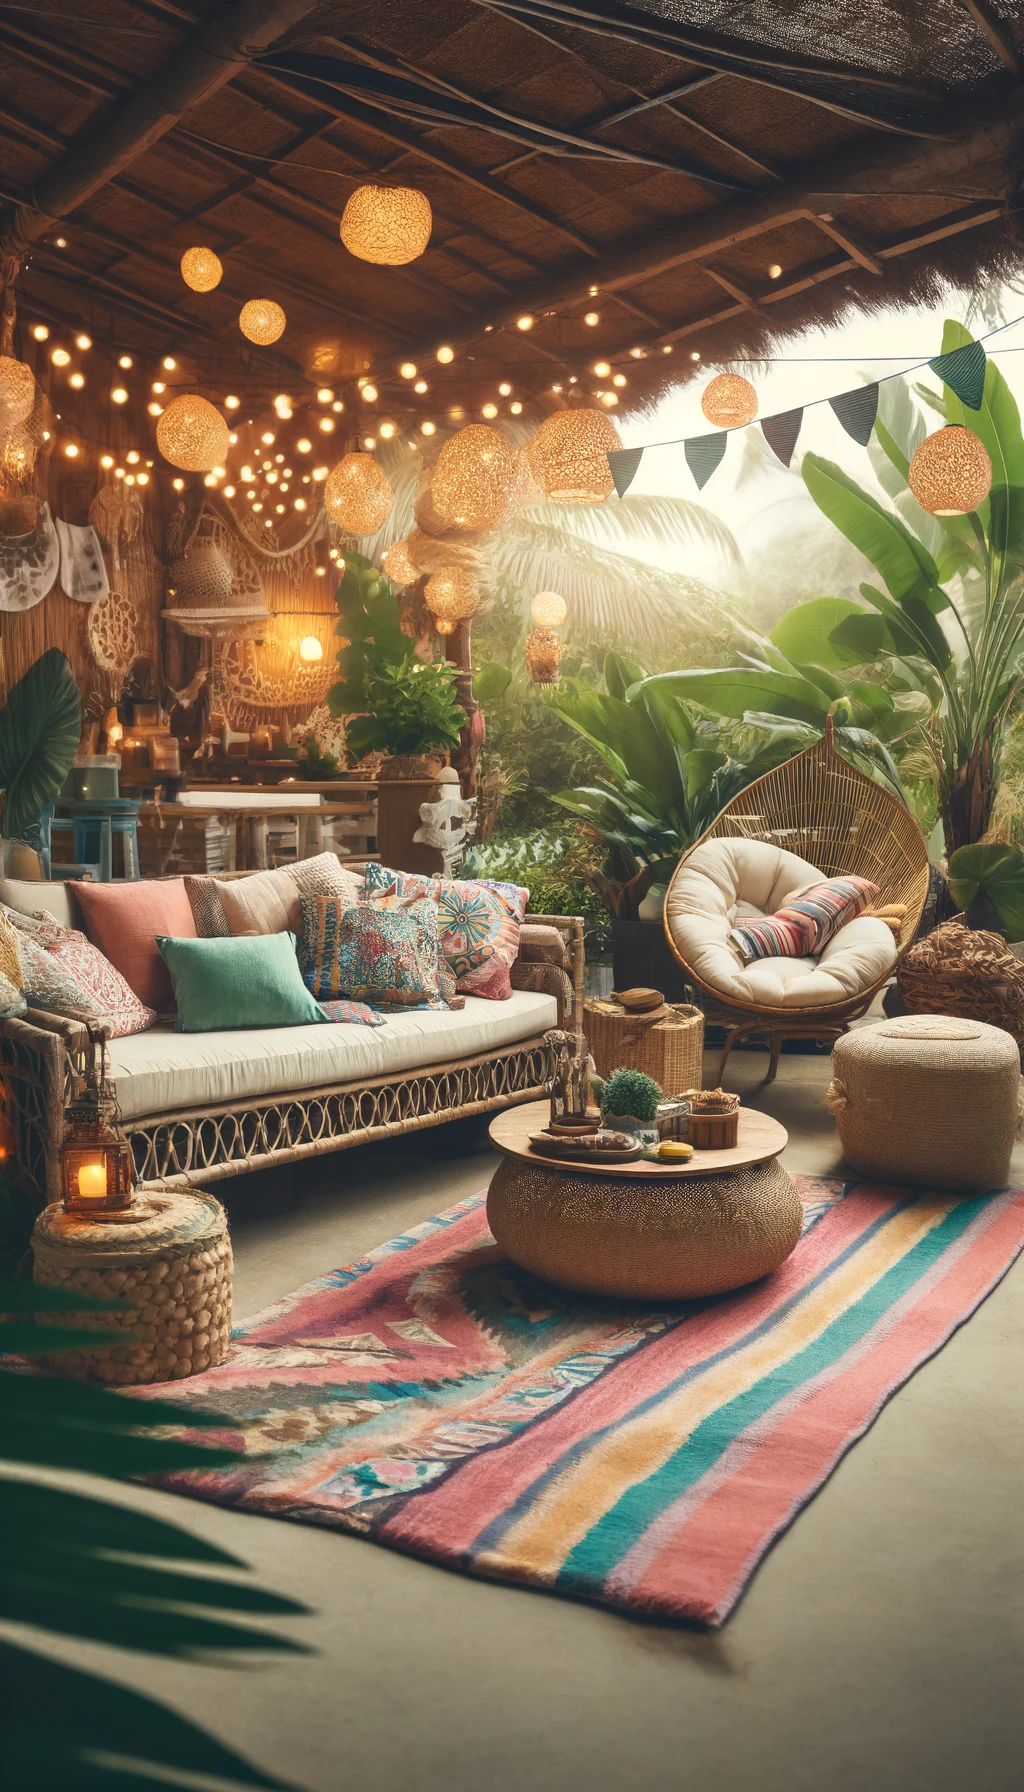 The space features a comfy rattan sofa adorned with fun throw pillows, a colorful rug, and string lights or lanterns for a cozy vibe. Lush plants and beachy accessories like a wooden table and a hammock or chair for chilling create a relaxing and inviting outdoor area